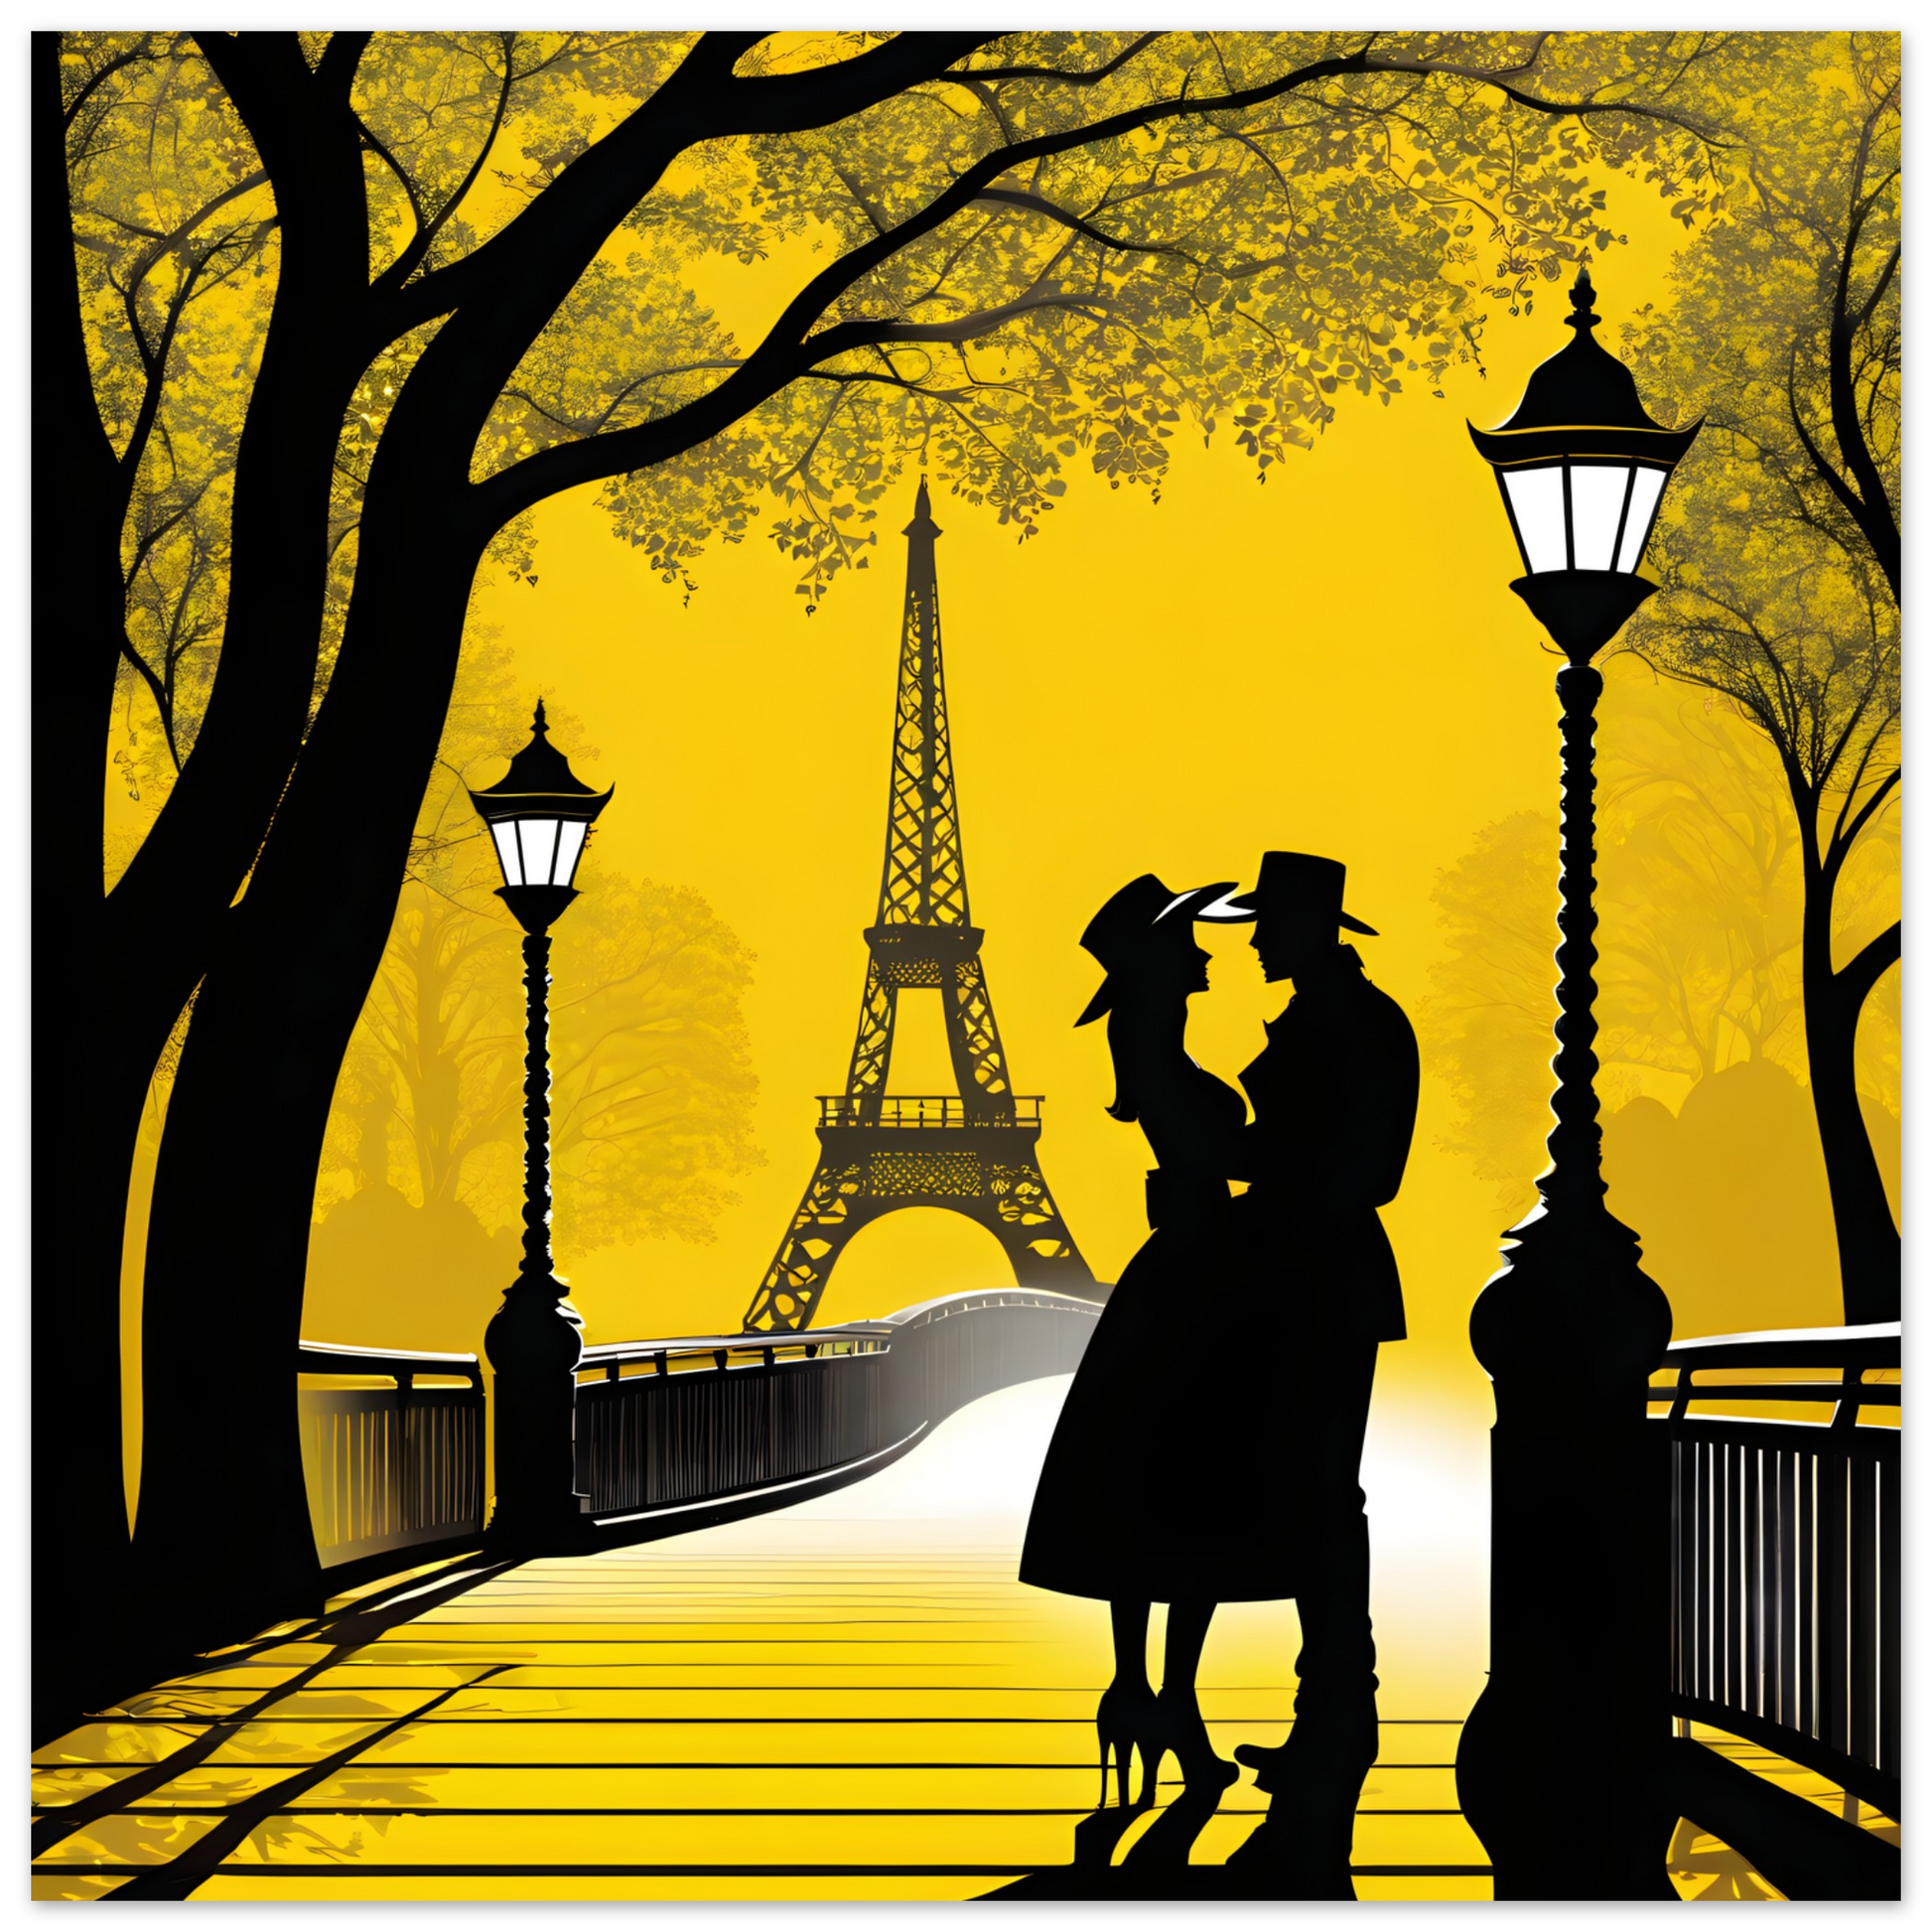 Couple Embracing with Eifel tower in back ground